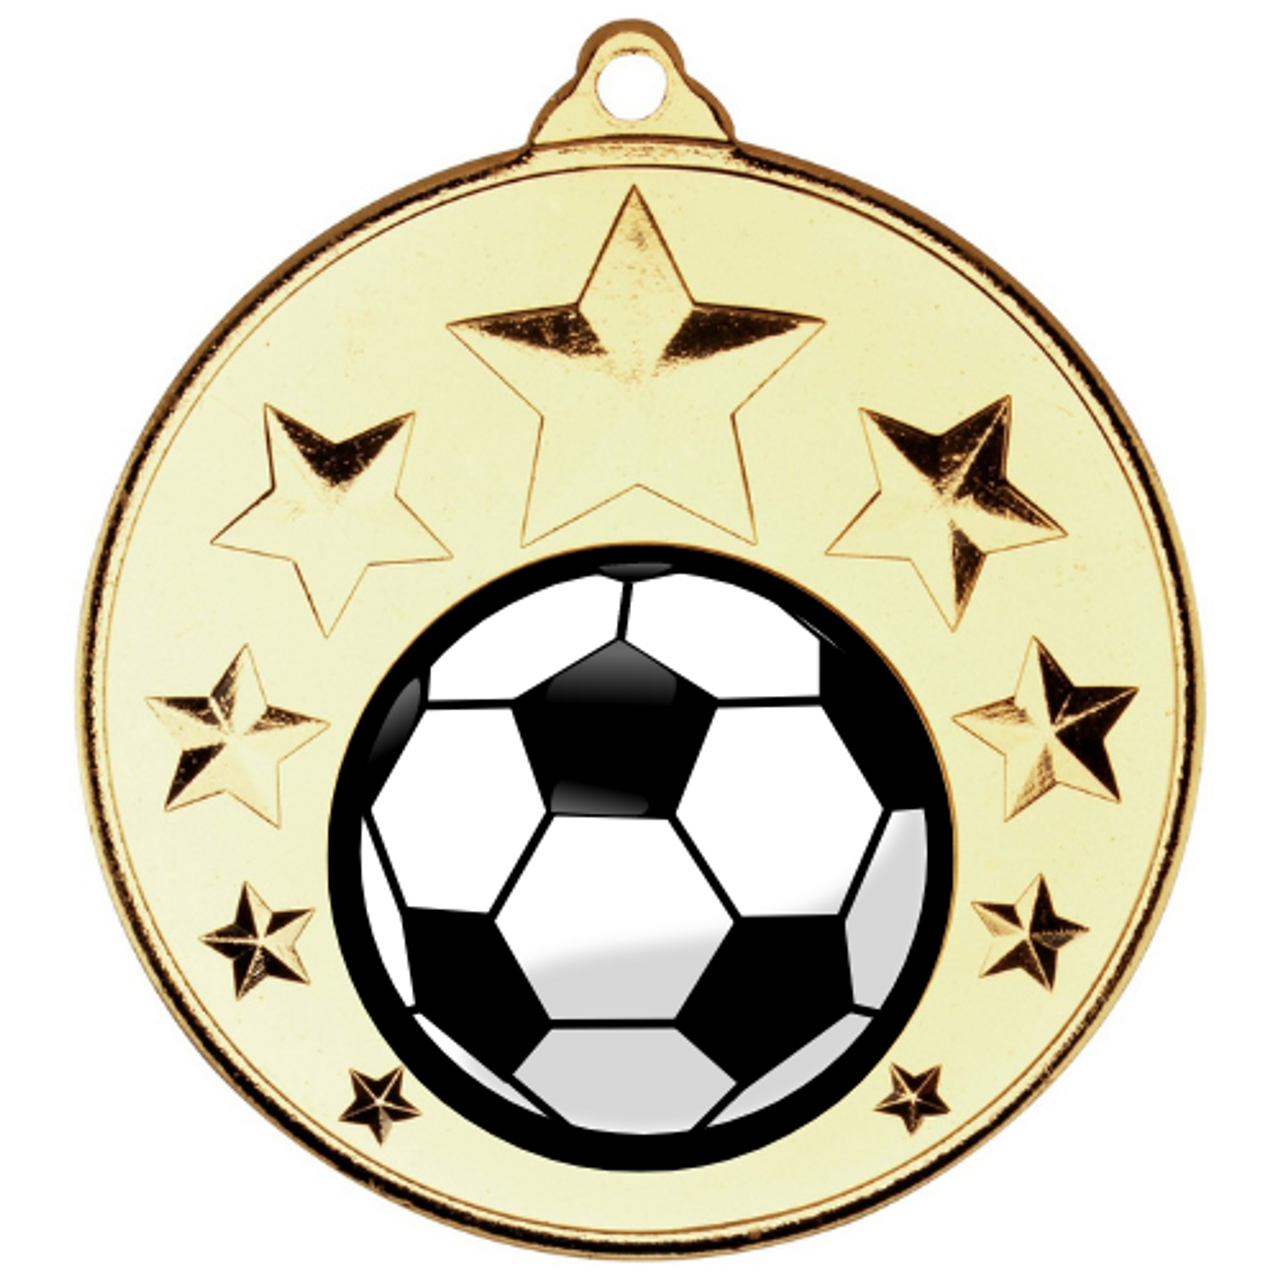 Football Medal Top Scorer 50mm Gold Stars Award With Free Engraving 